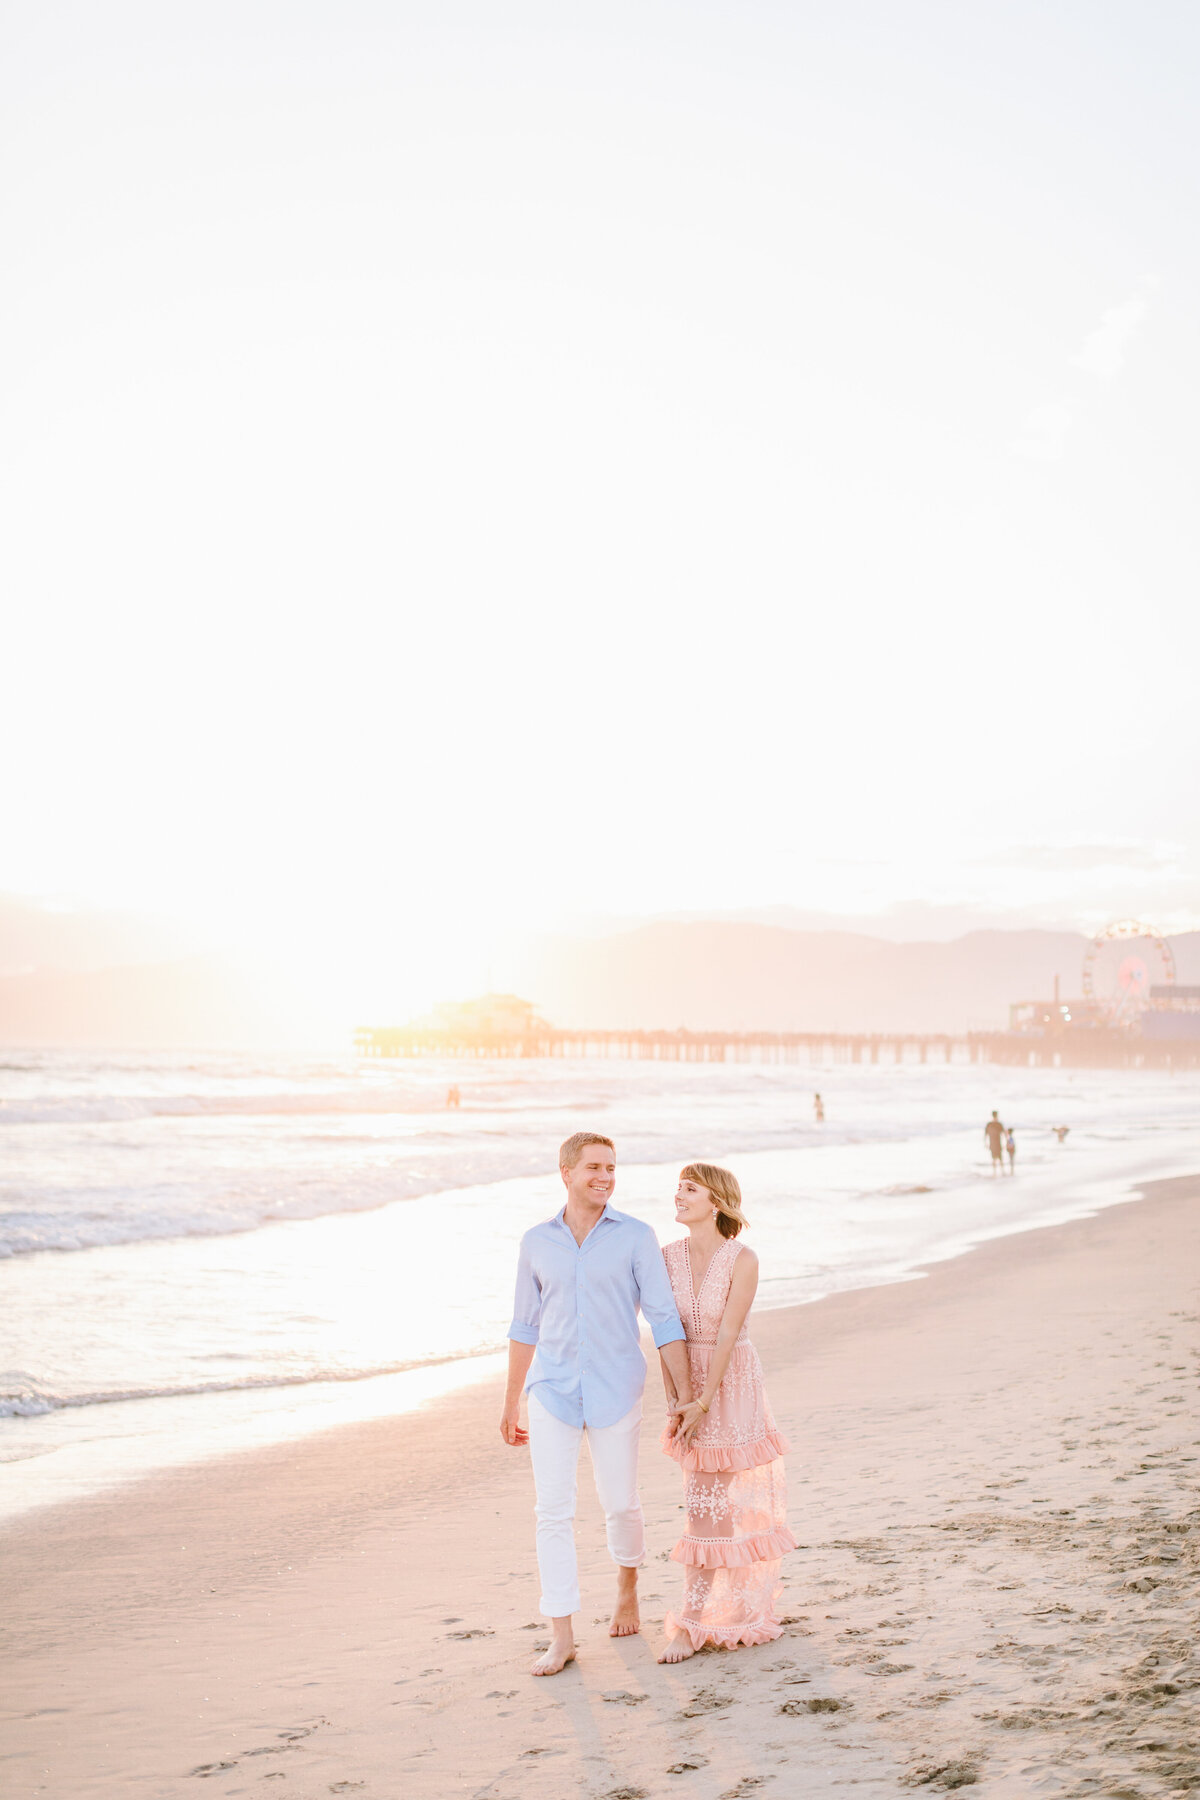 Best California and Texas Engagement Photographer-Jodee Debes Photography-125